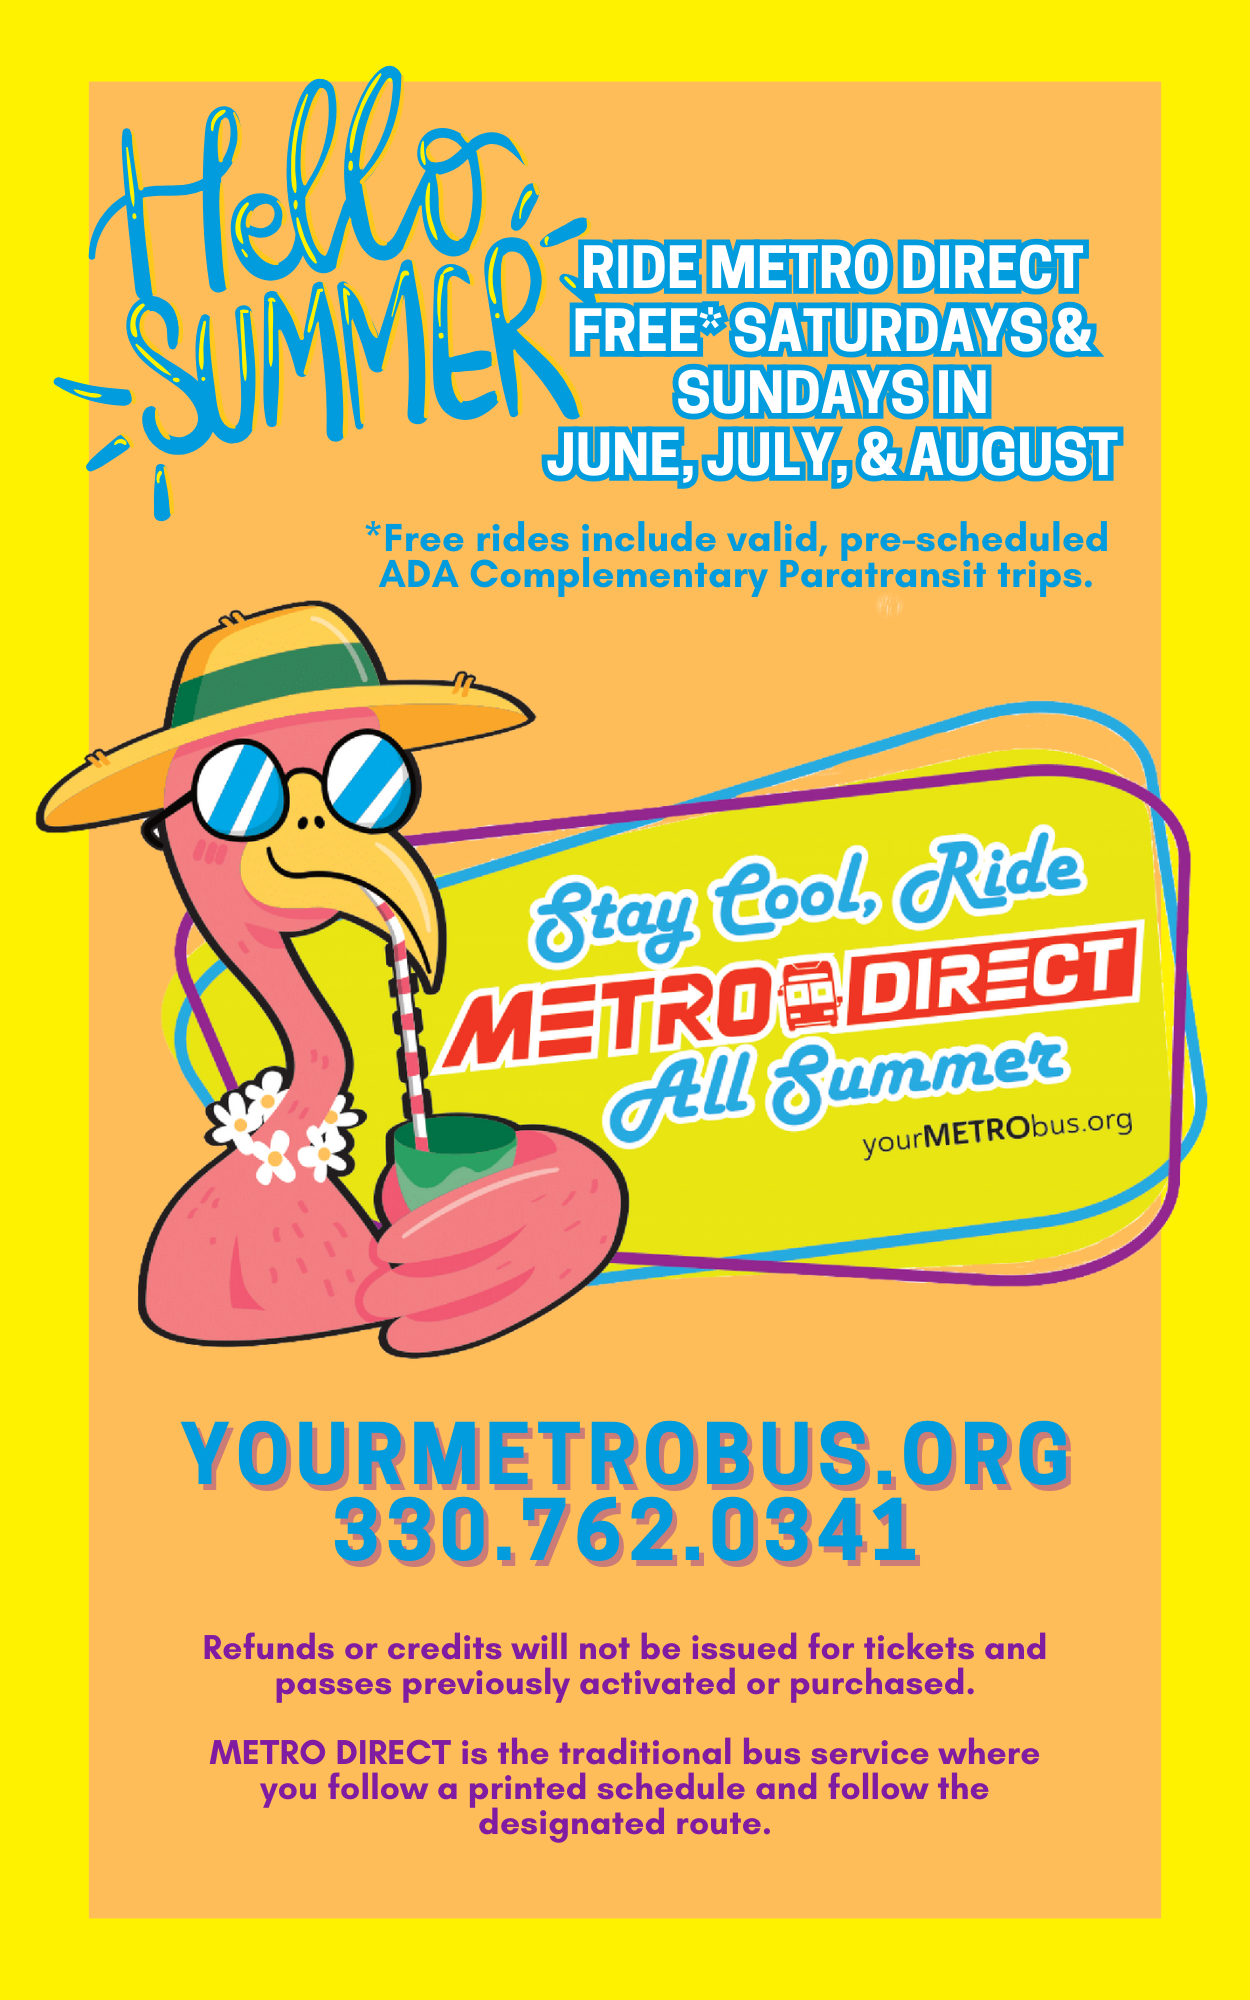 copy of print ad for free weekends in june, july and august